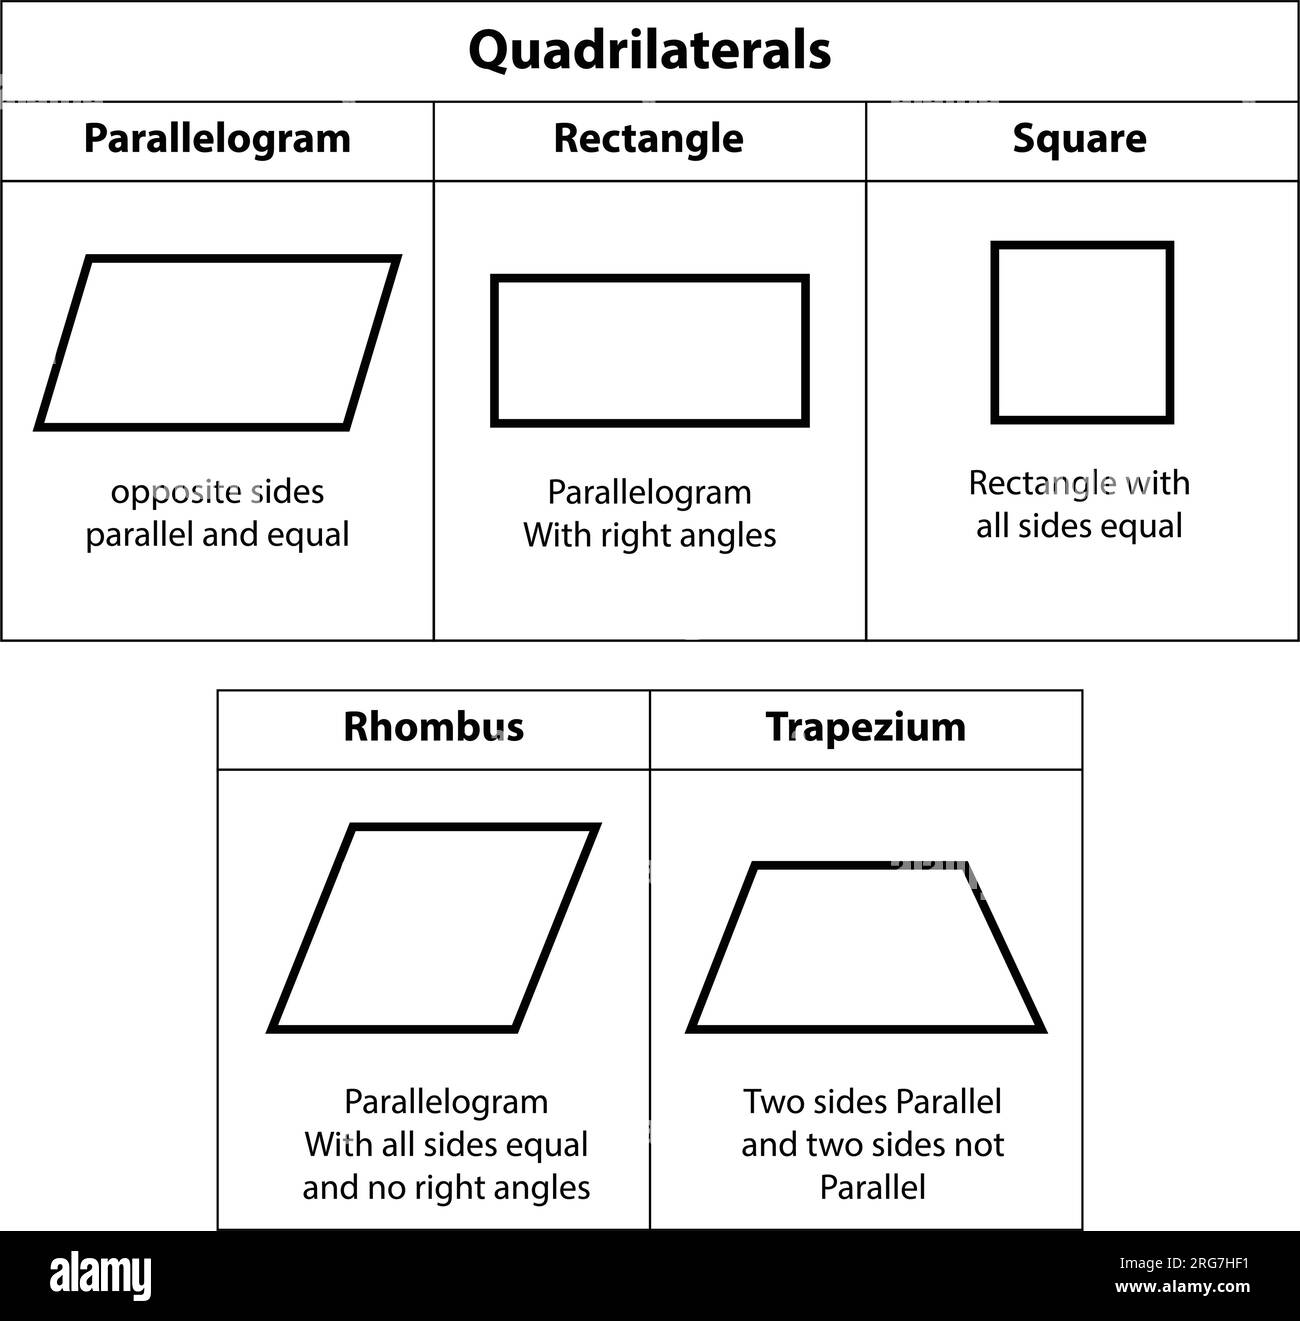 Quadrilaterals. parallelogram, Rectangle, square, Rhombus, Trapezium. 2D shape icon for math teaching, isolated on white background. Stock Vector